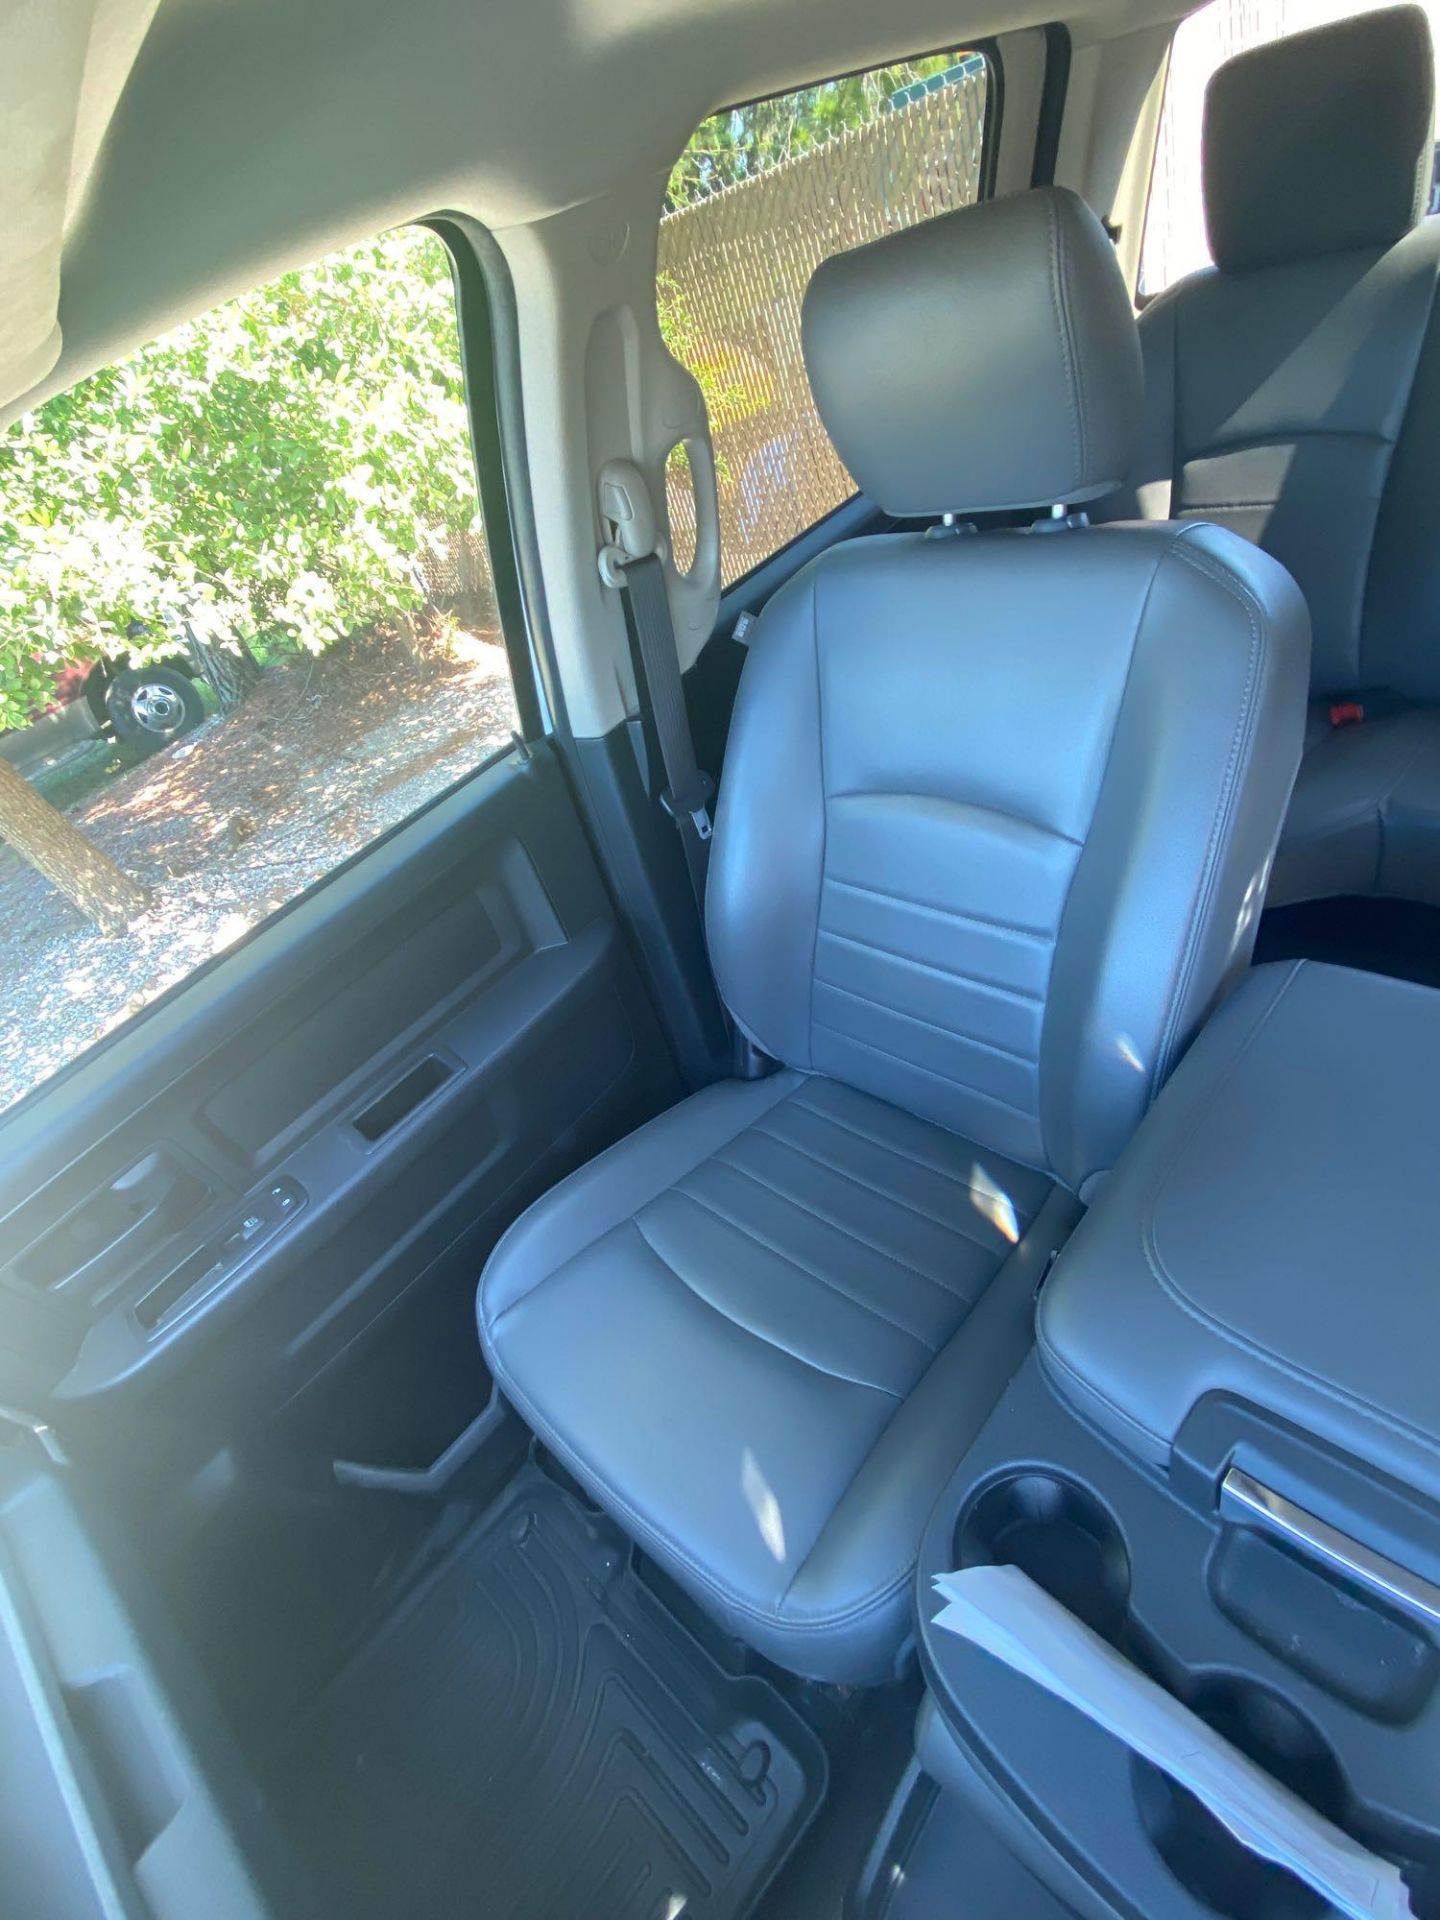 2015 DODGE 1500 HEMI CREW CAB PICK UP TRUCK, LEATHER SEATS, 86,302 MILES SHOWING, ICE COLD AIR, RUNS - Image 16 of 20